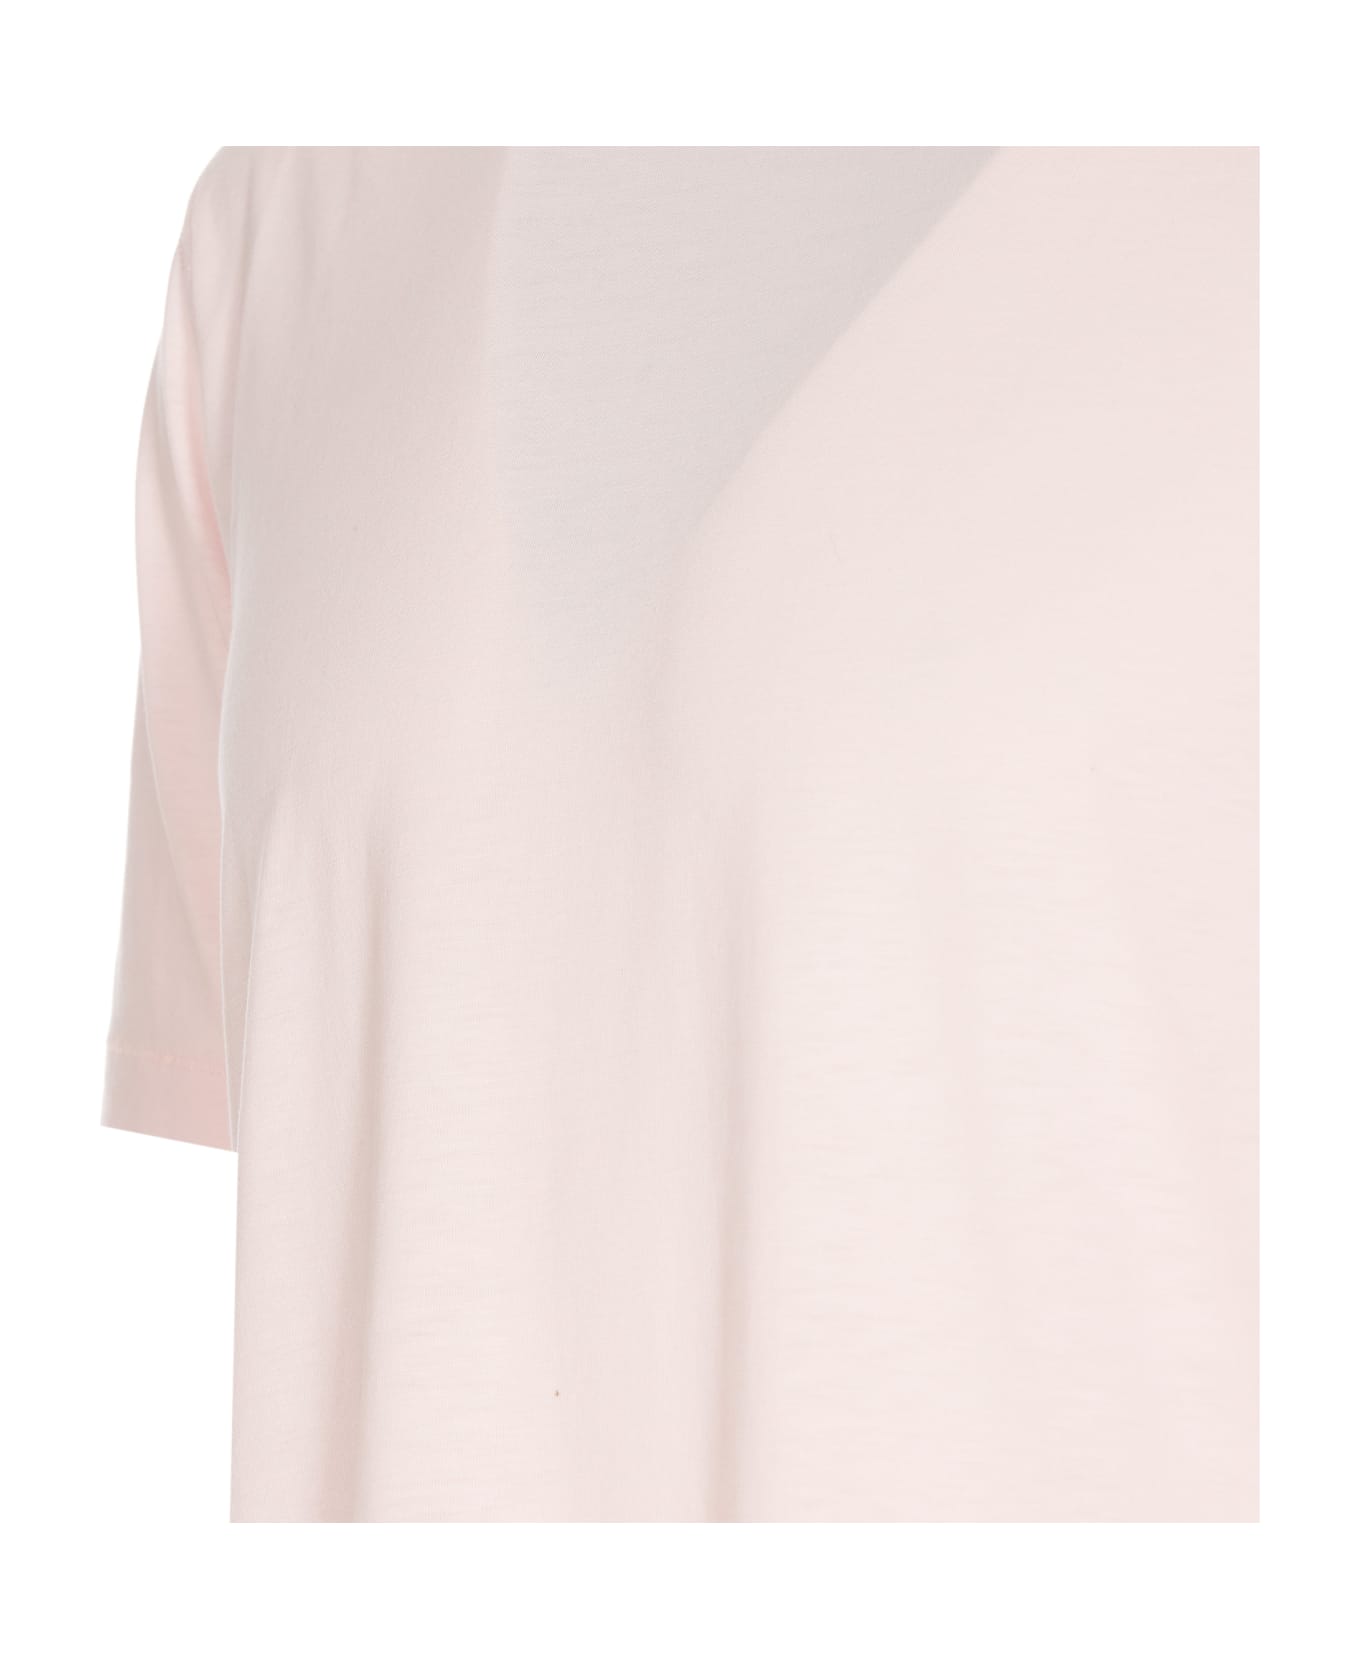 Tom Ford T-shirt - Pink